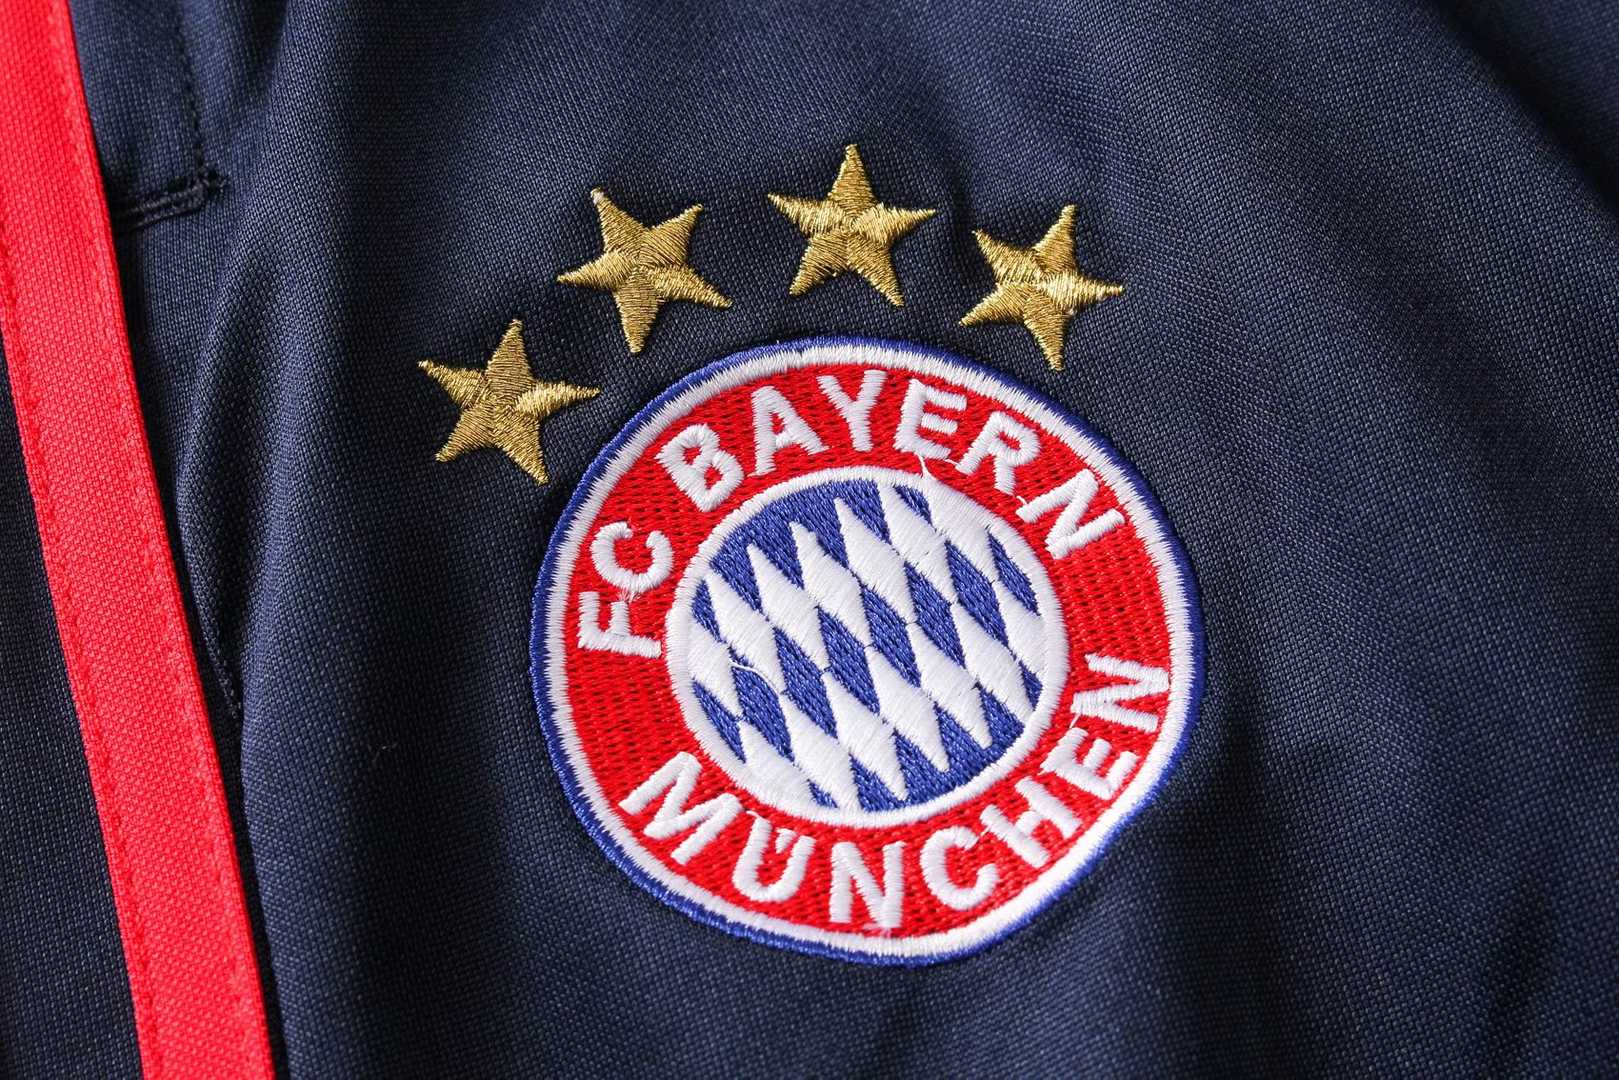 2019/20 Bayern Munich Low Neck Red Mens Soccer Training Suit(Jacket + Pants)